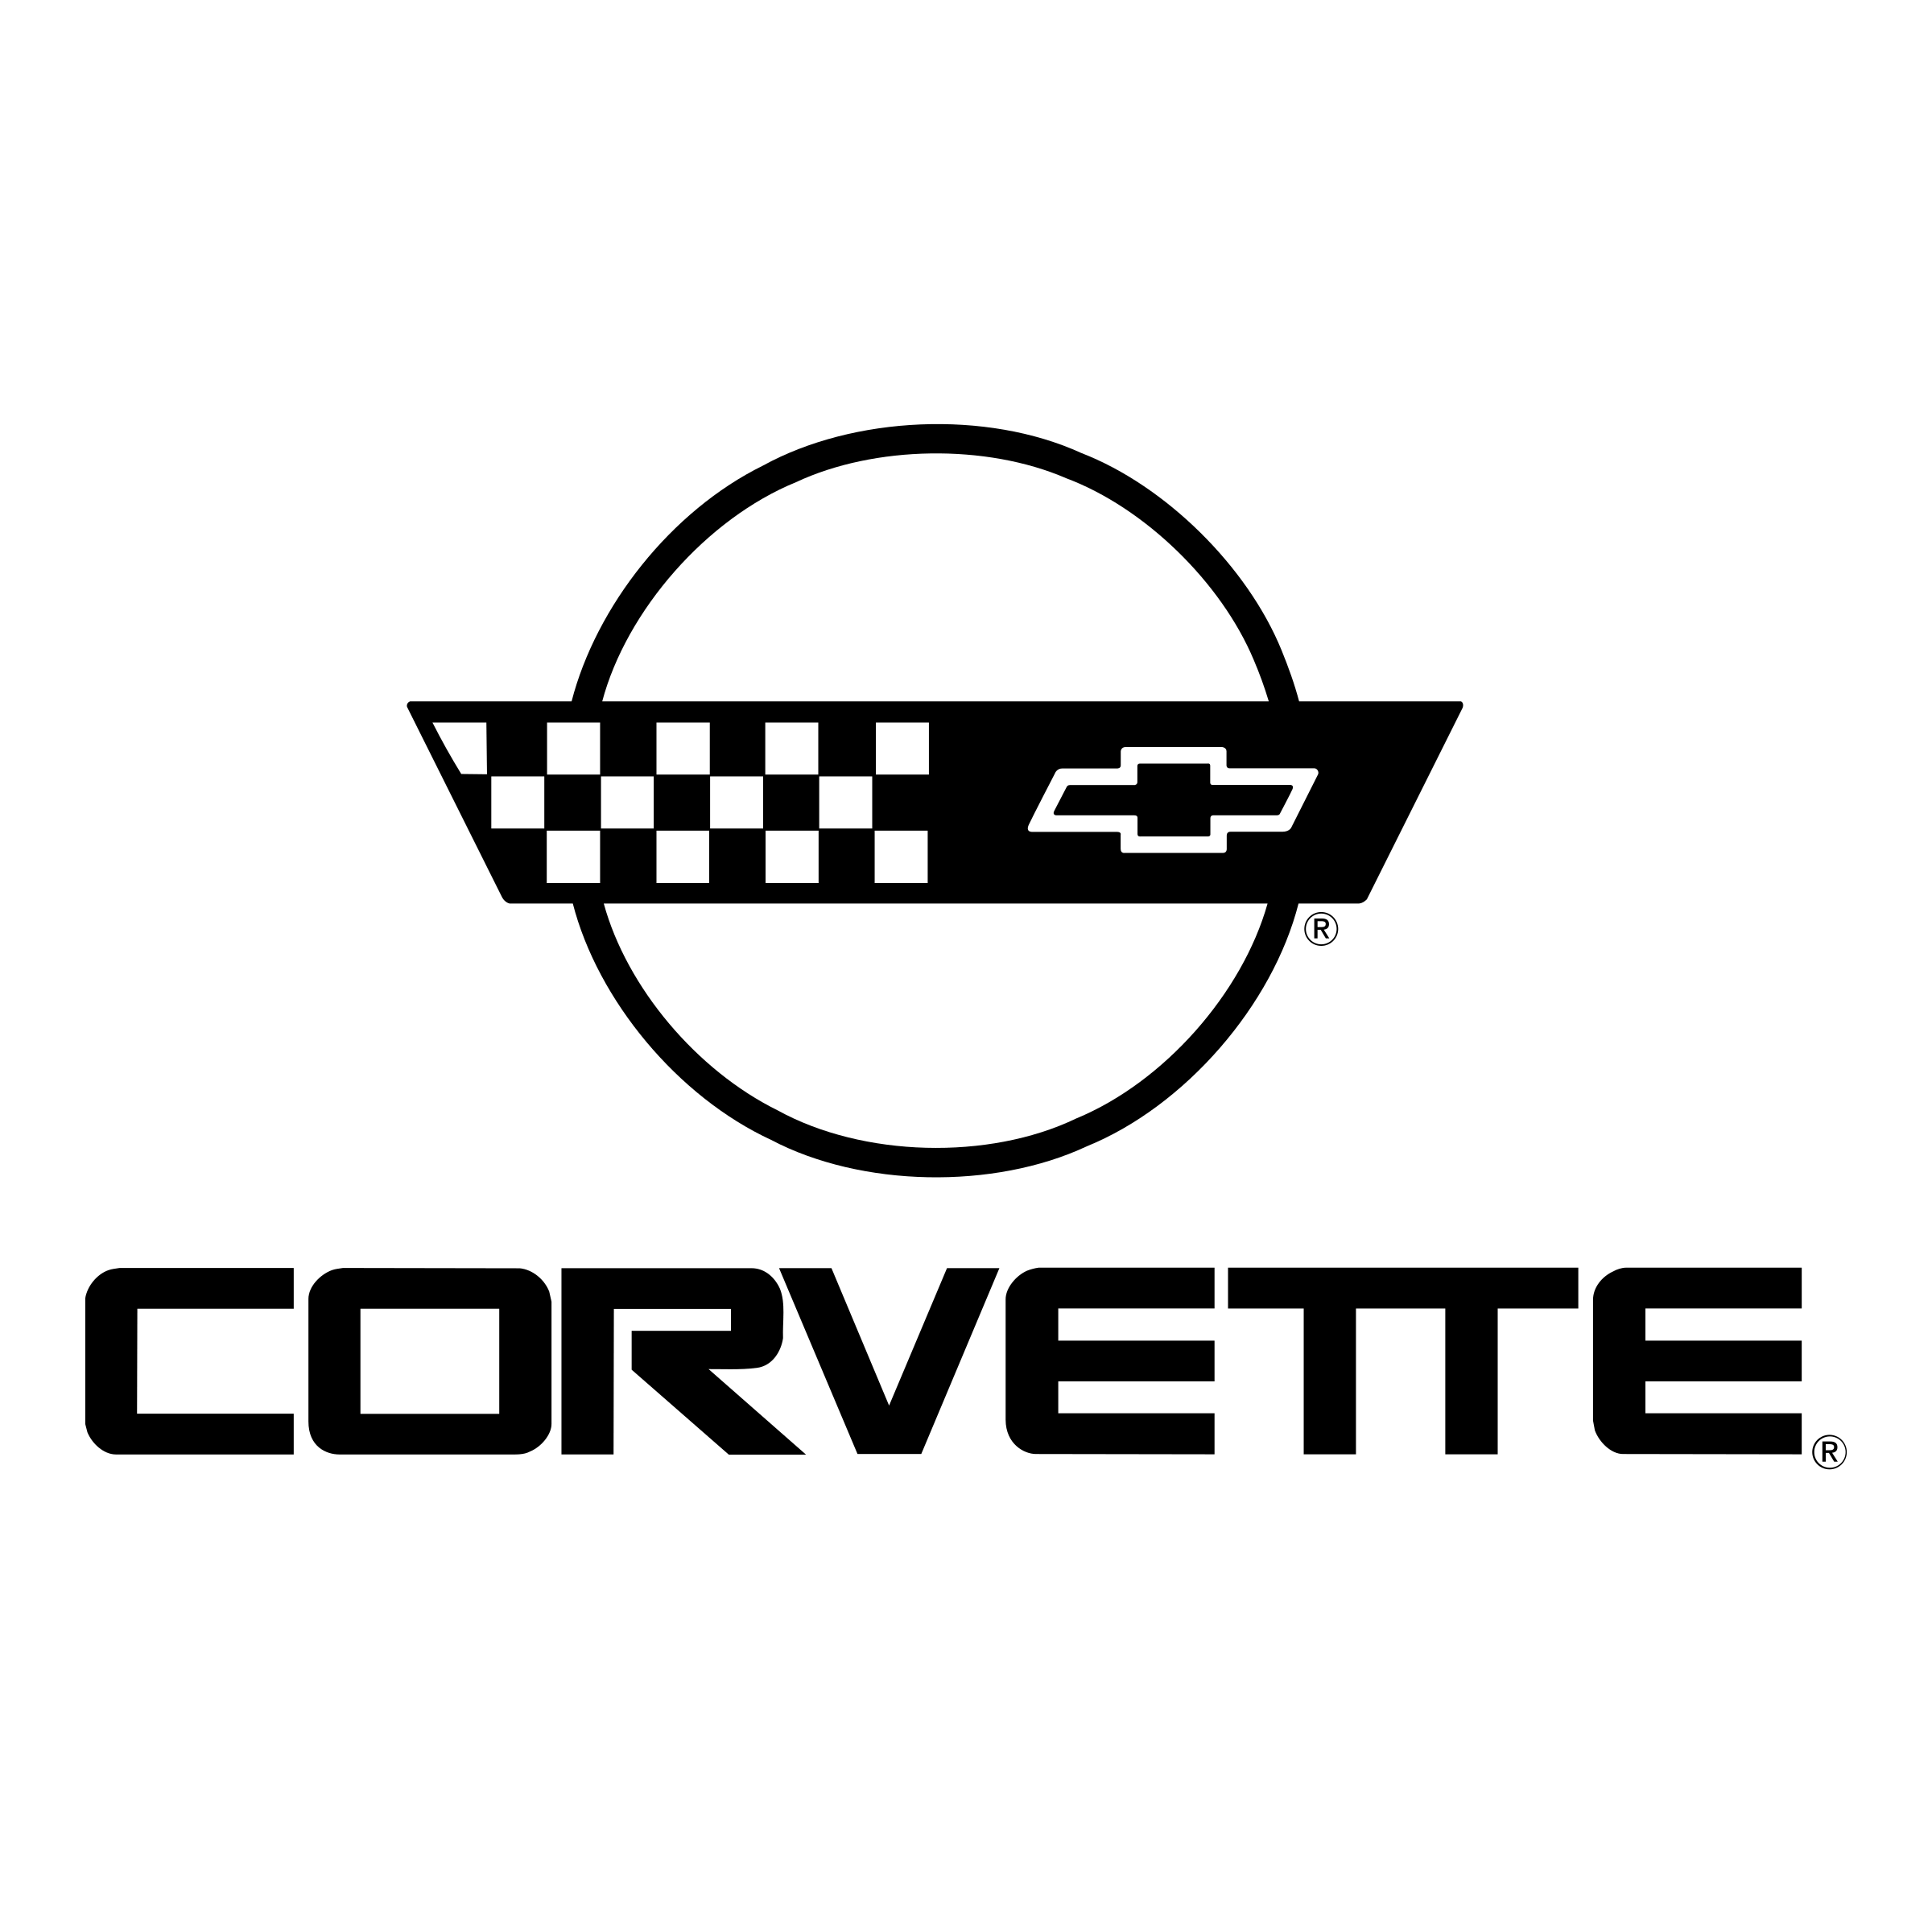 Black and white corvette logo clipart collection - lopisavers